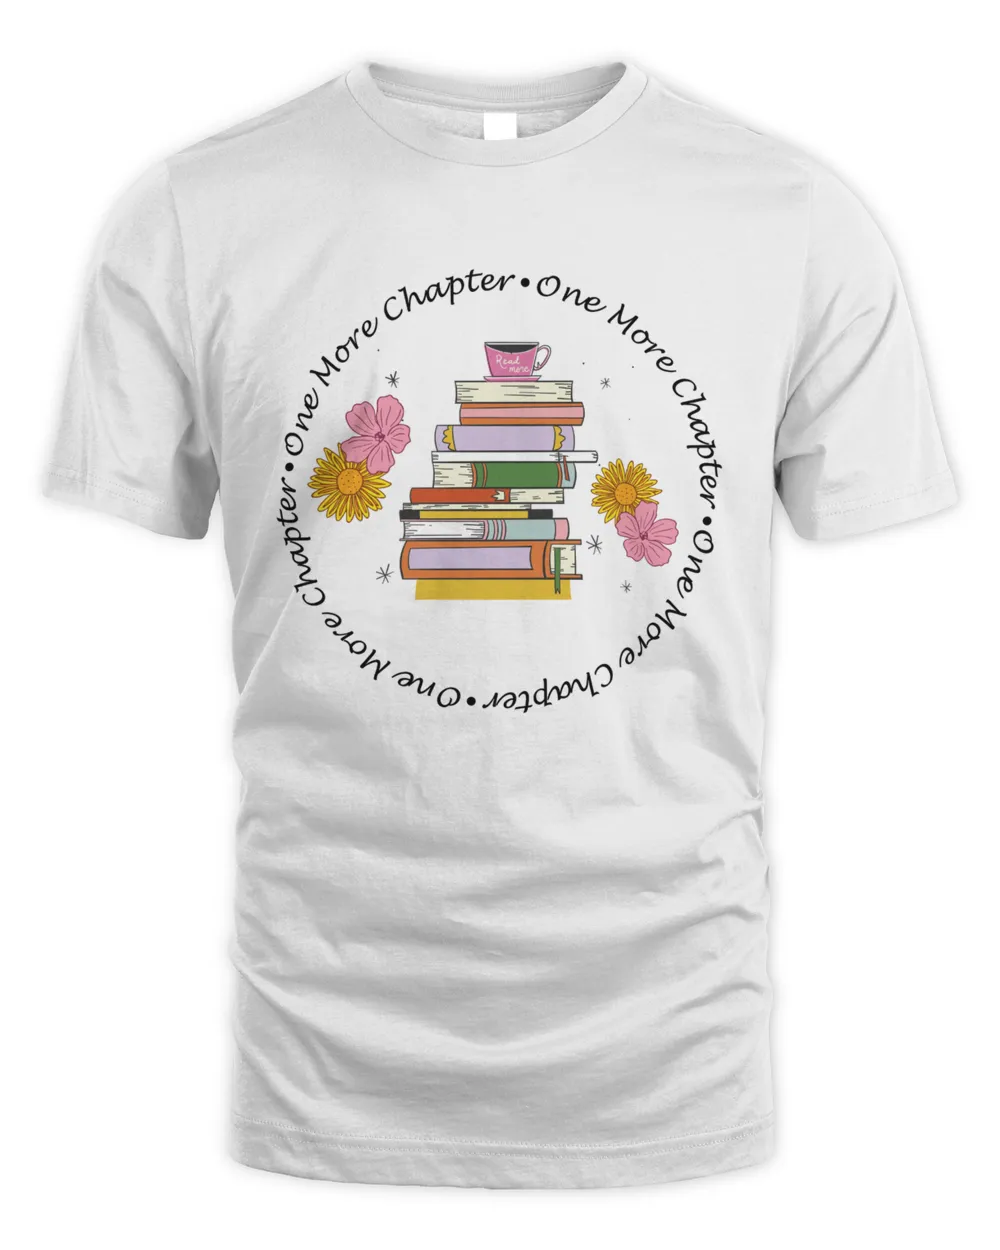 One More Chapter Shirt